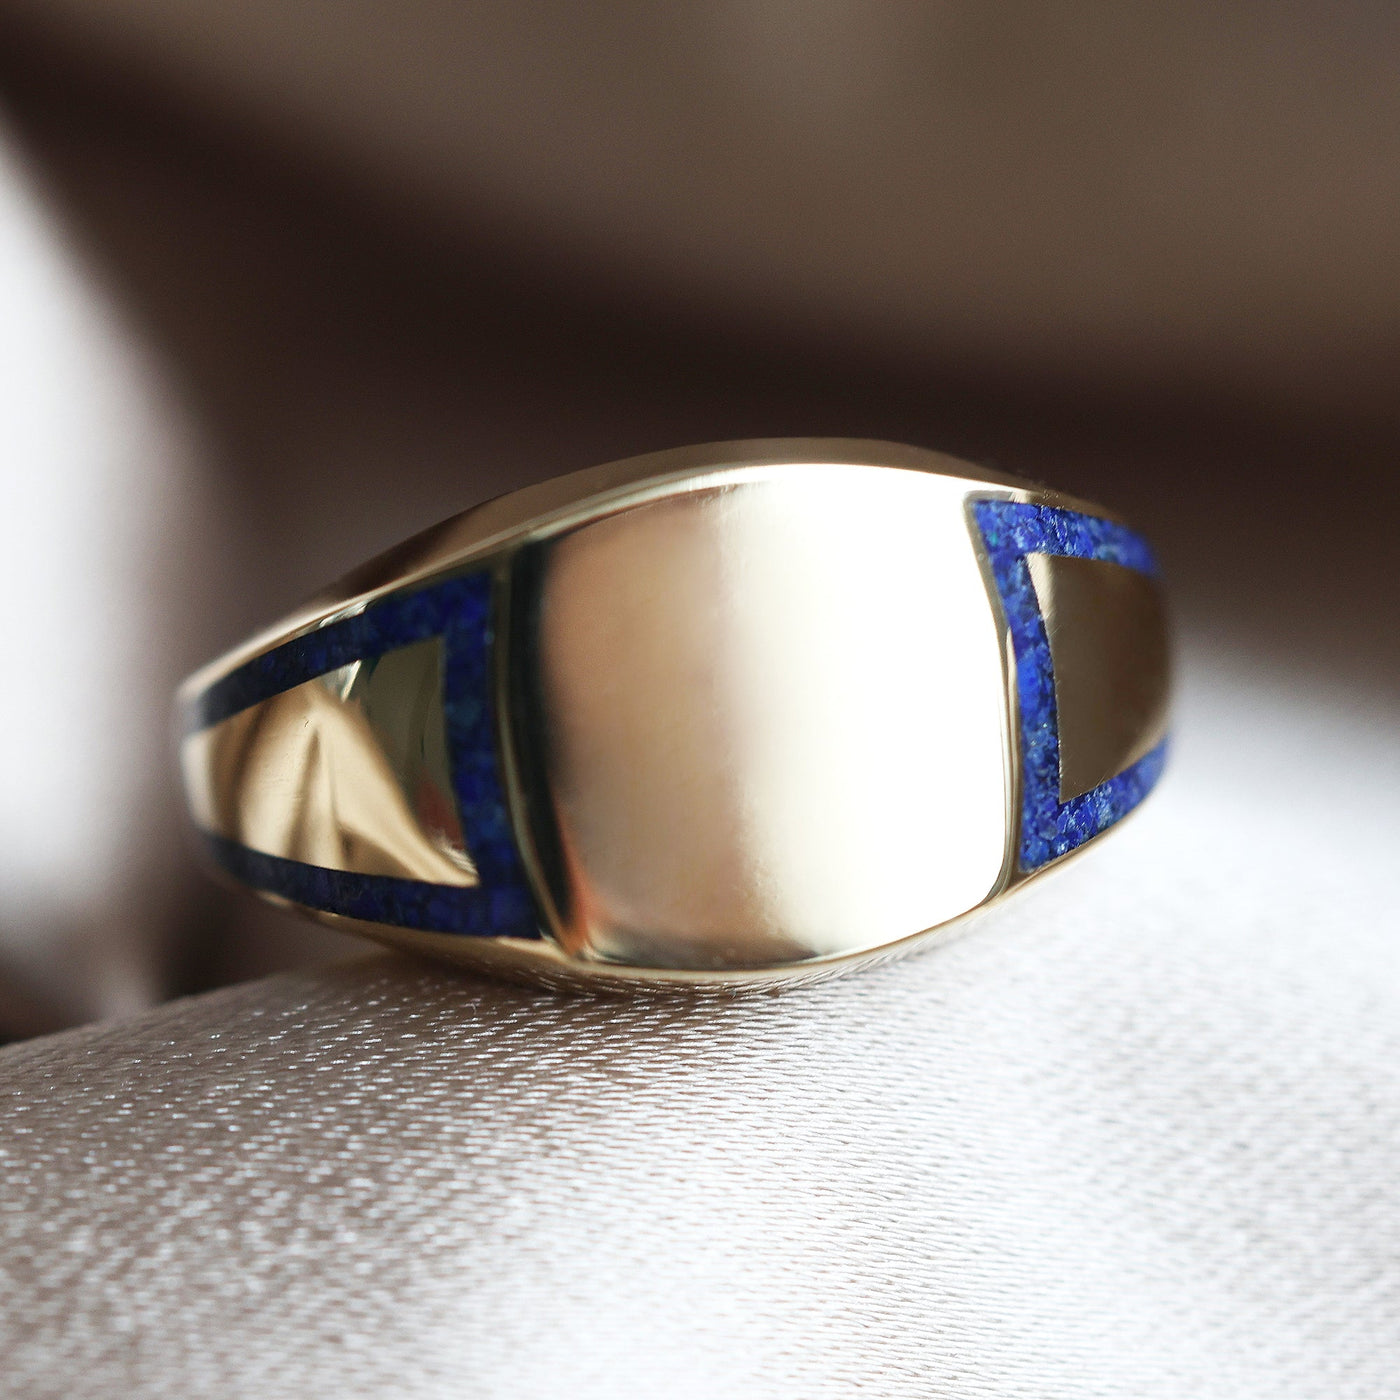 Gold ring with lapis lazuli inlay, 11mm front width, polished finish. Made of 14k & 18k gold or platinum.